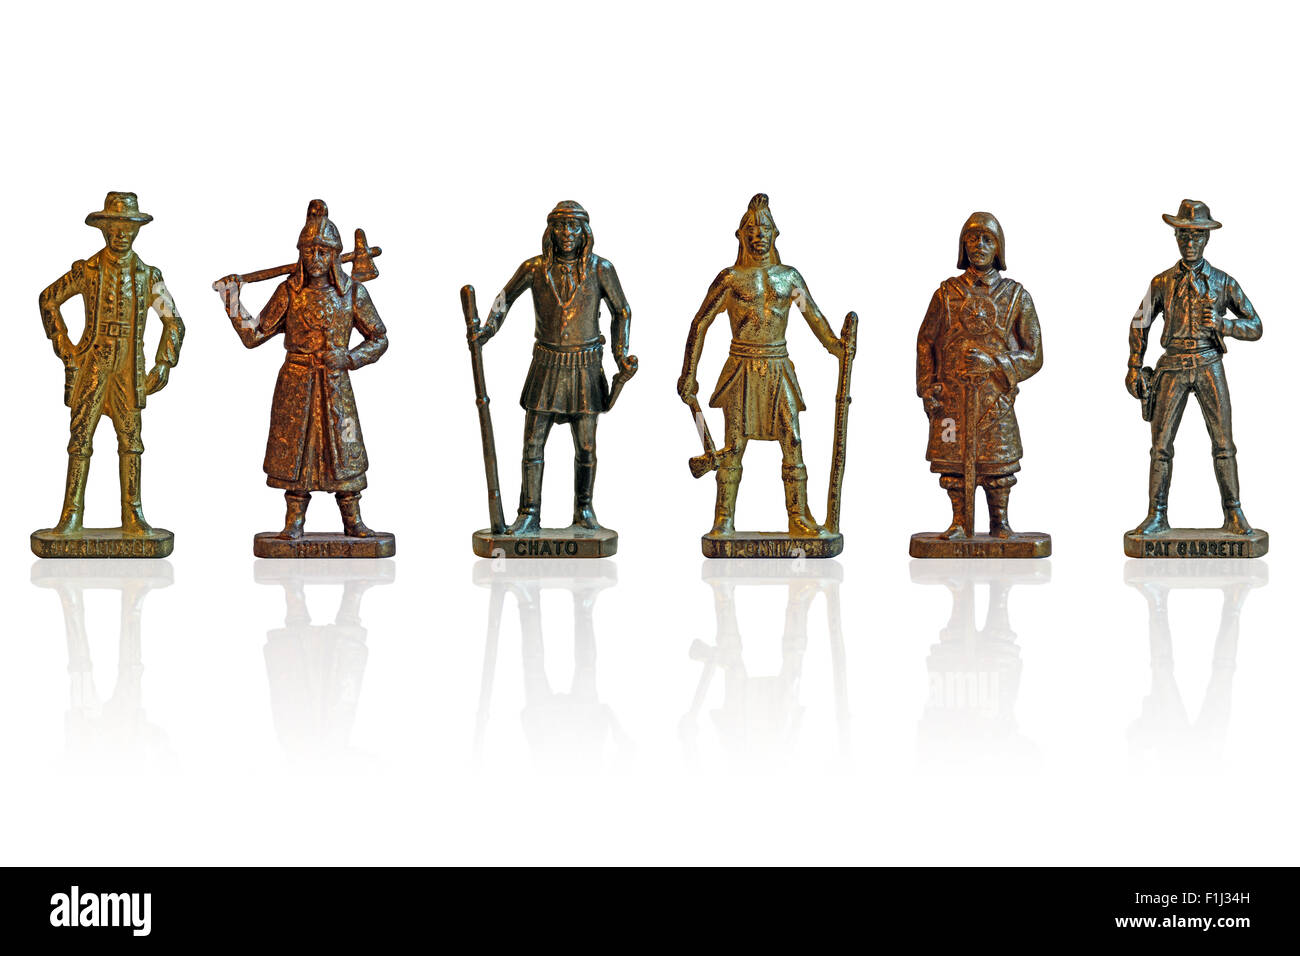 Toy soldiers in a row. Stock Photo